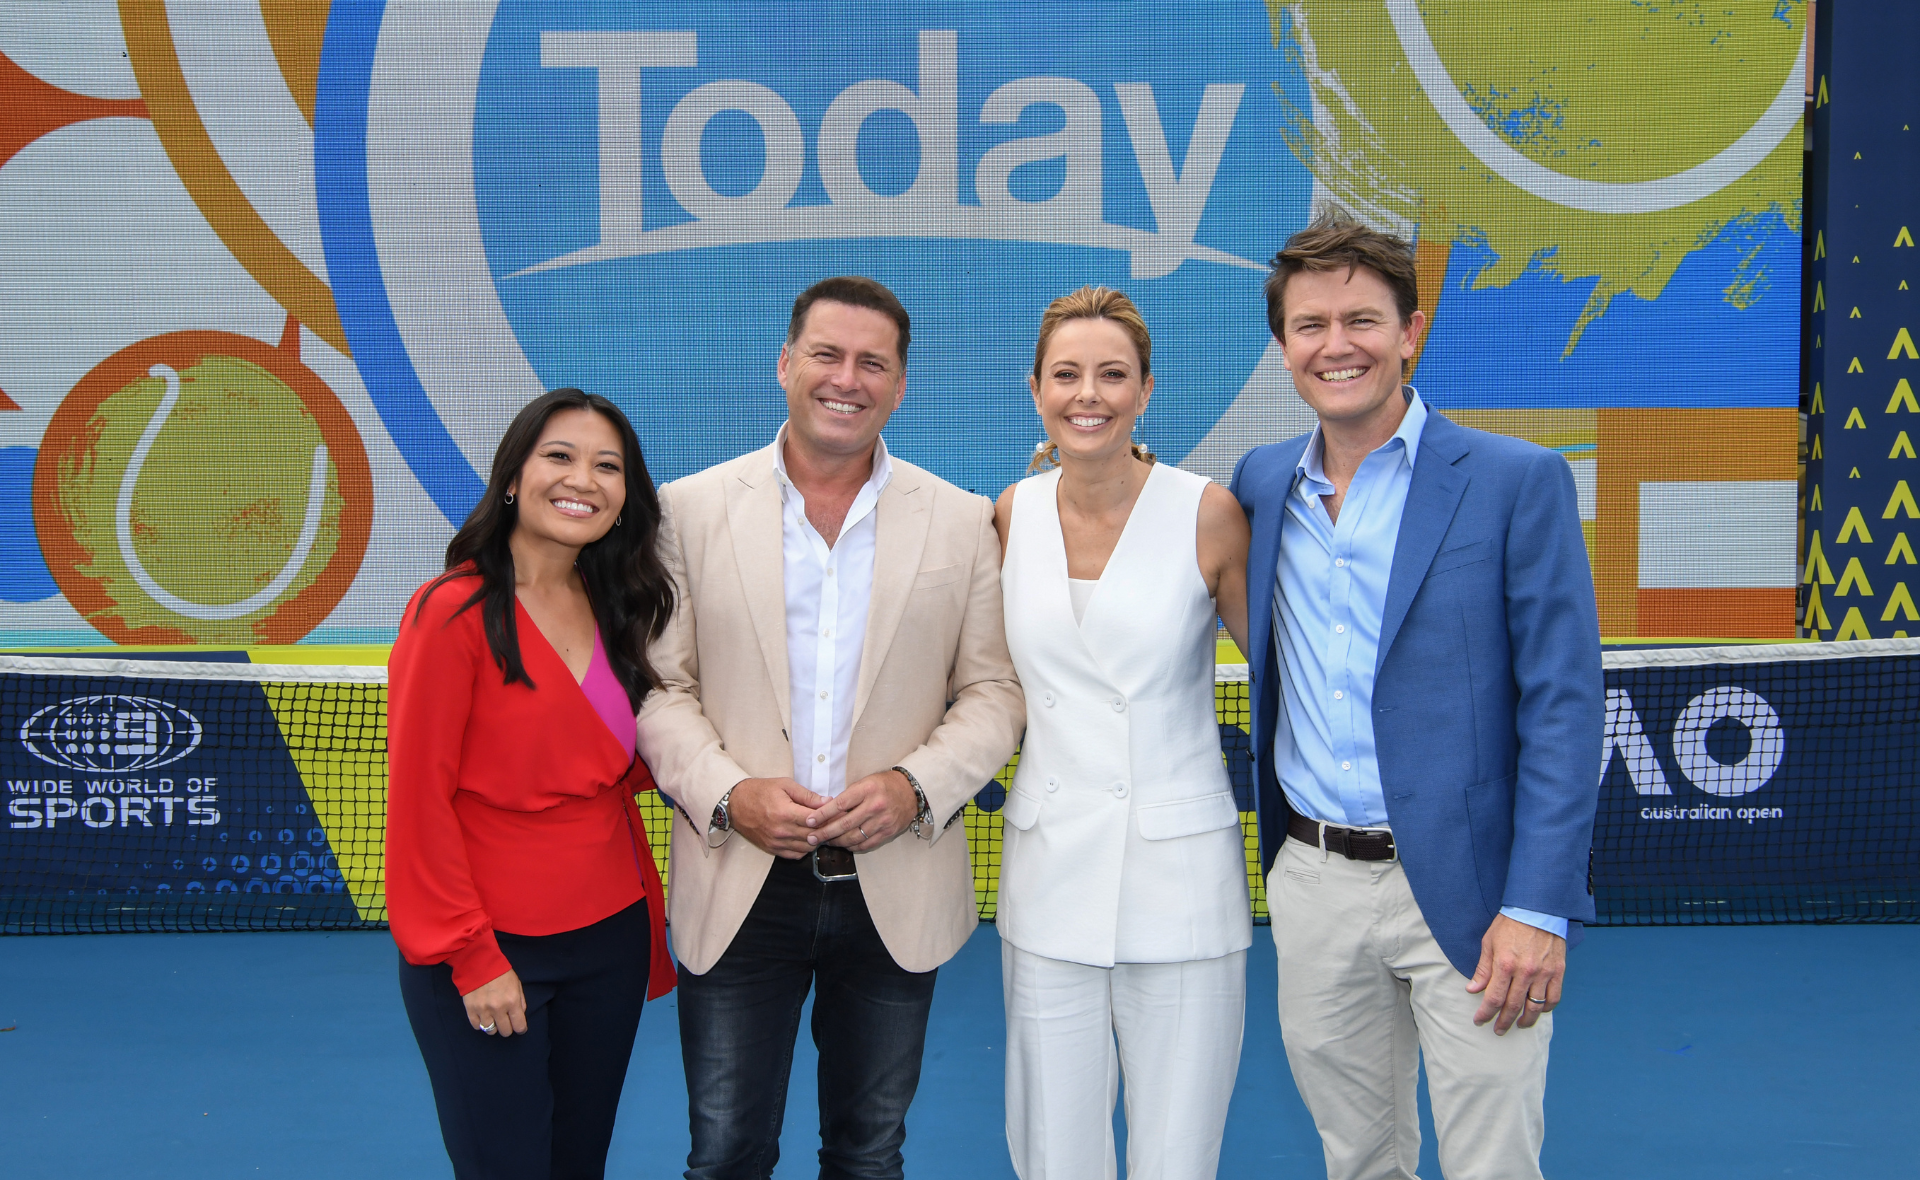 Sunrise warned not to “underestimate” the Today show as the ratings war continues